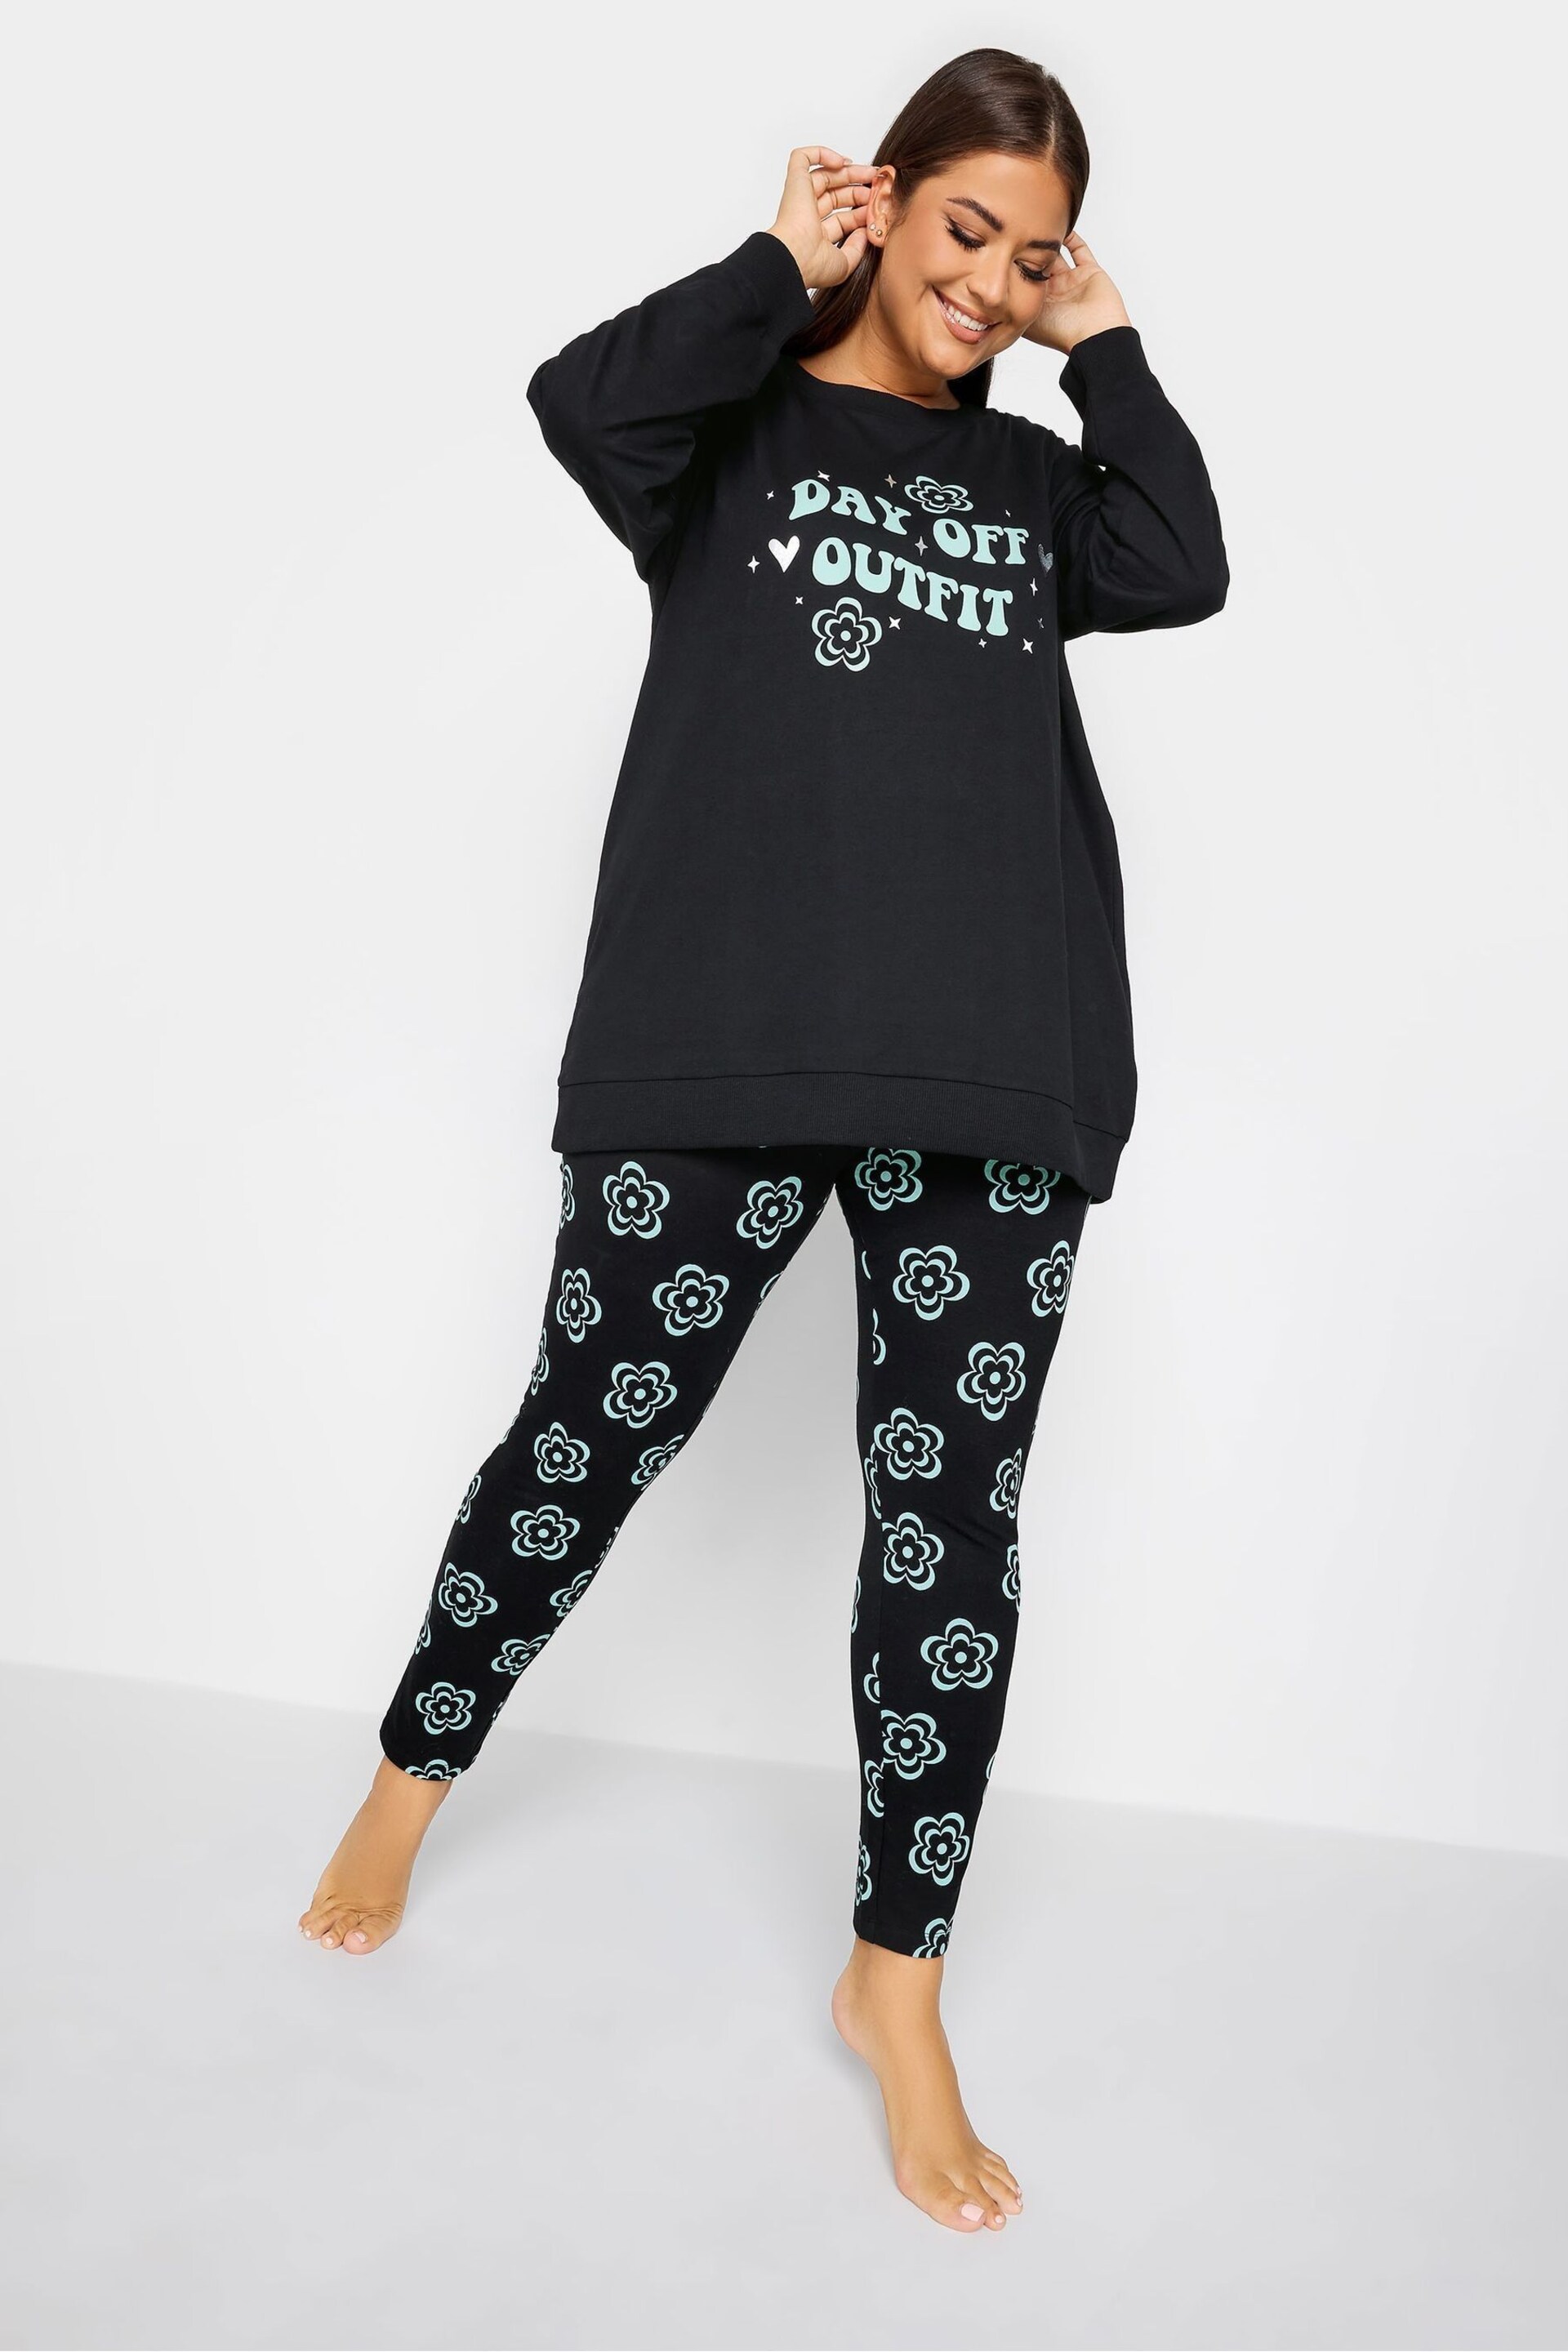 Yours Curve Black Day Off Outfit Sweat Set - Image 1 of 4